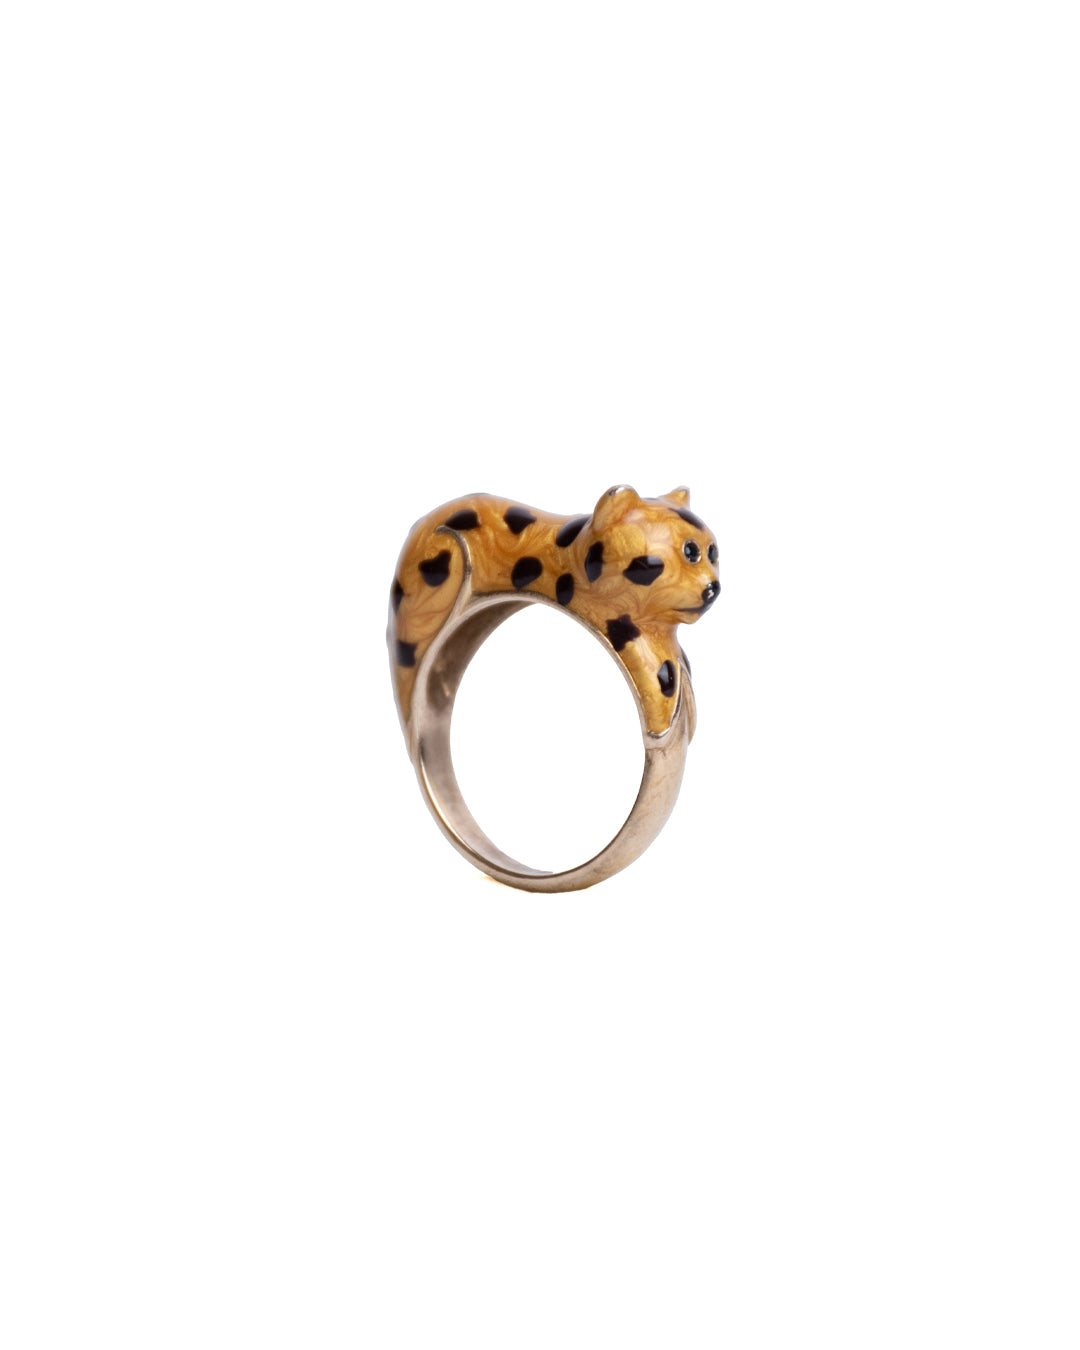 Handmade handcrafted leopard ring fun colorful